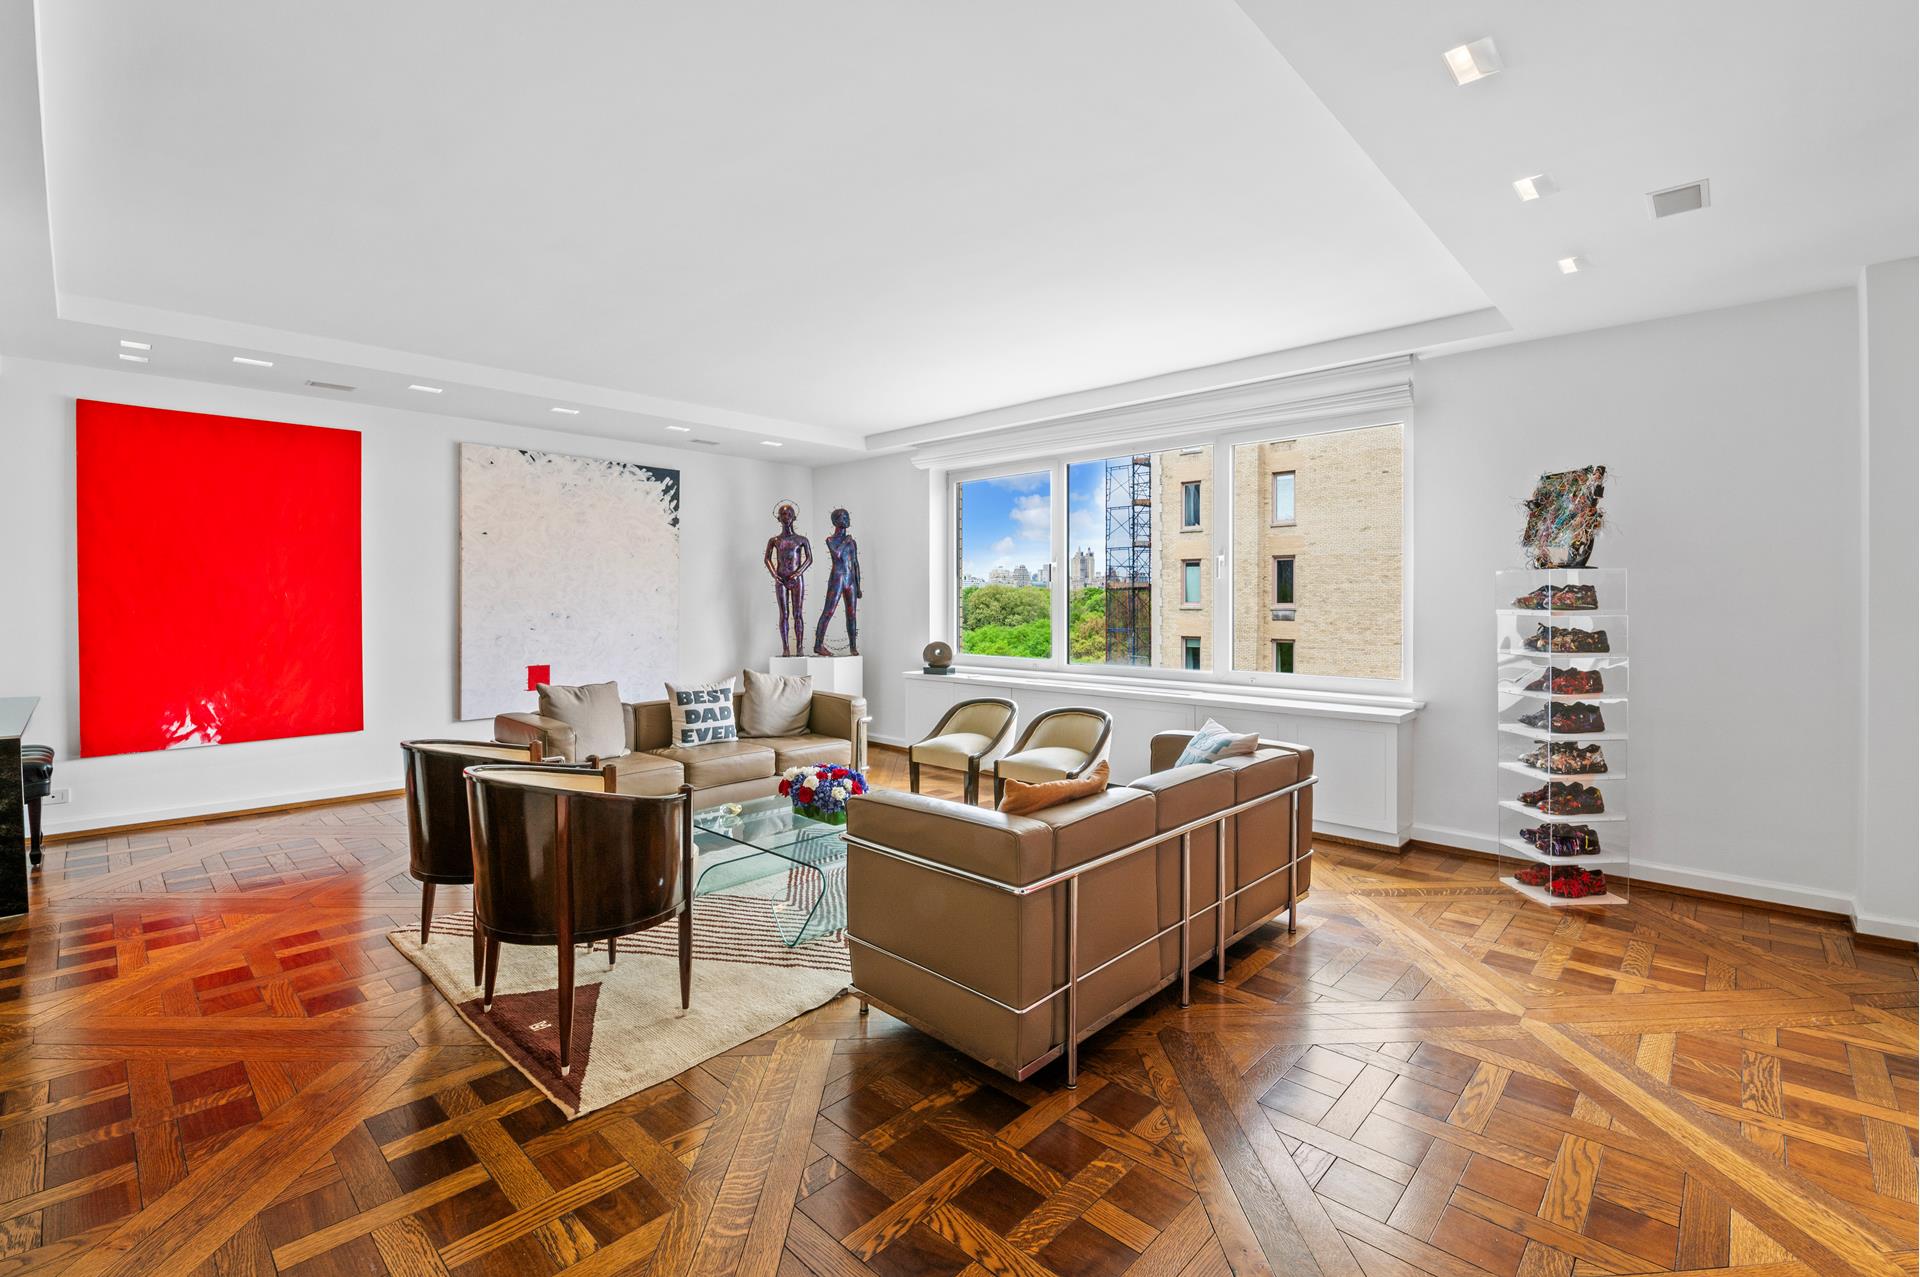 936 5th Avenue 11B, Lenox Hill, Upper East Side, NYC - 3 Bedrooms  
3.5 Bathrooms  
7 Rooms - 